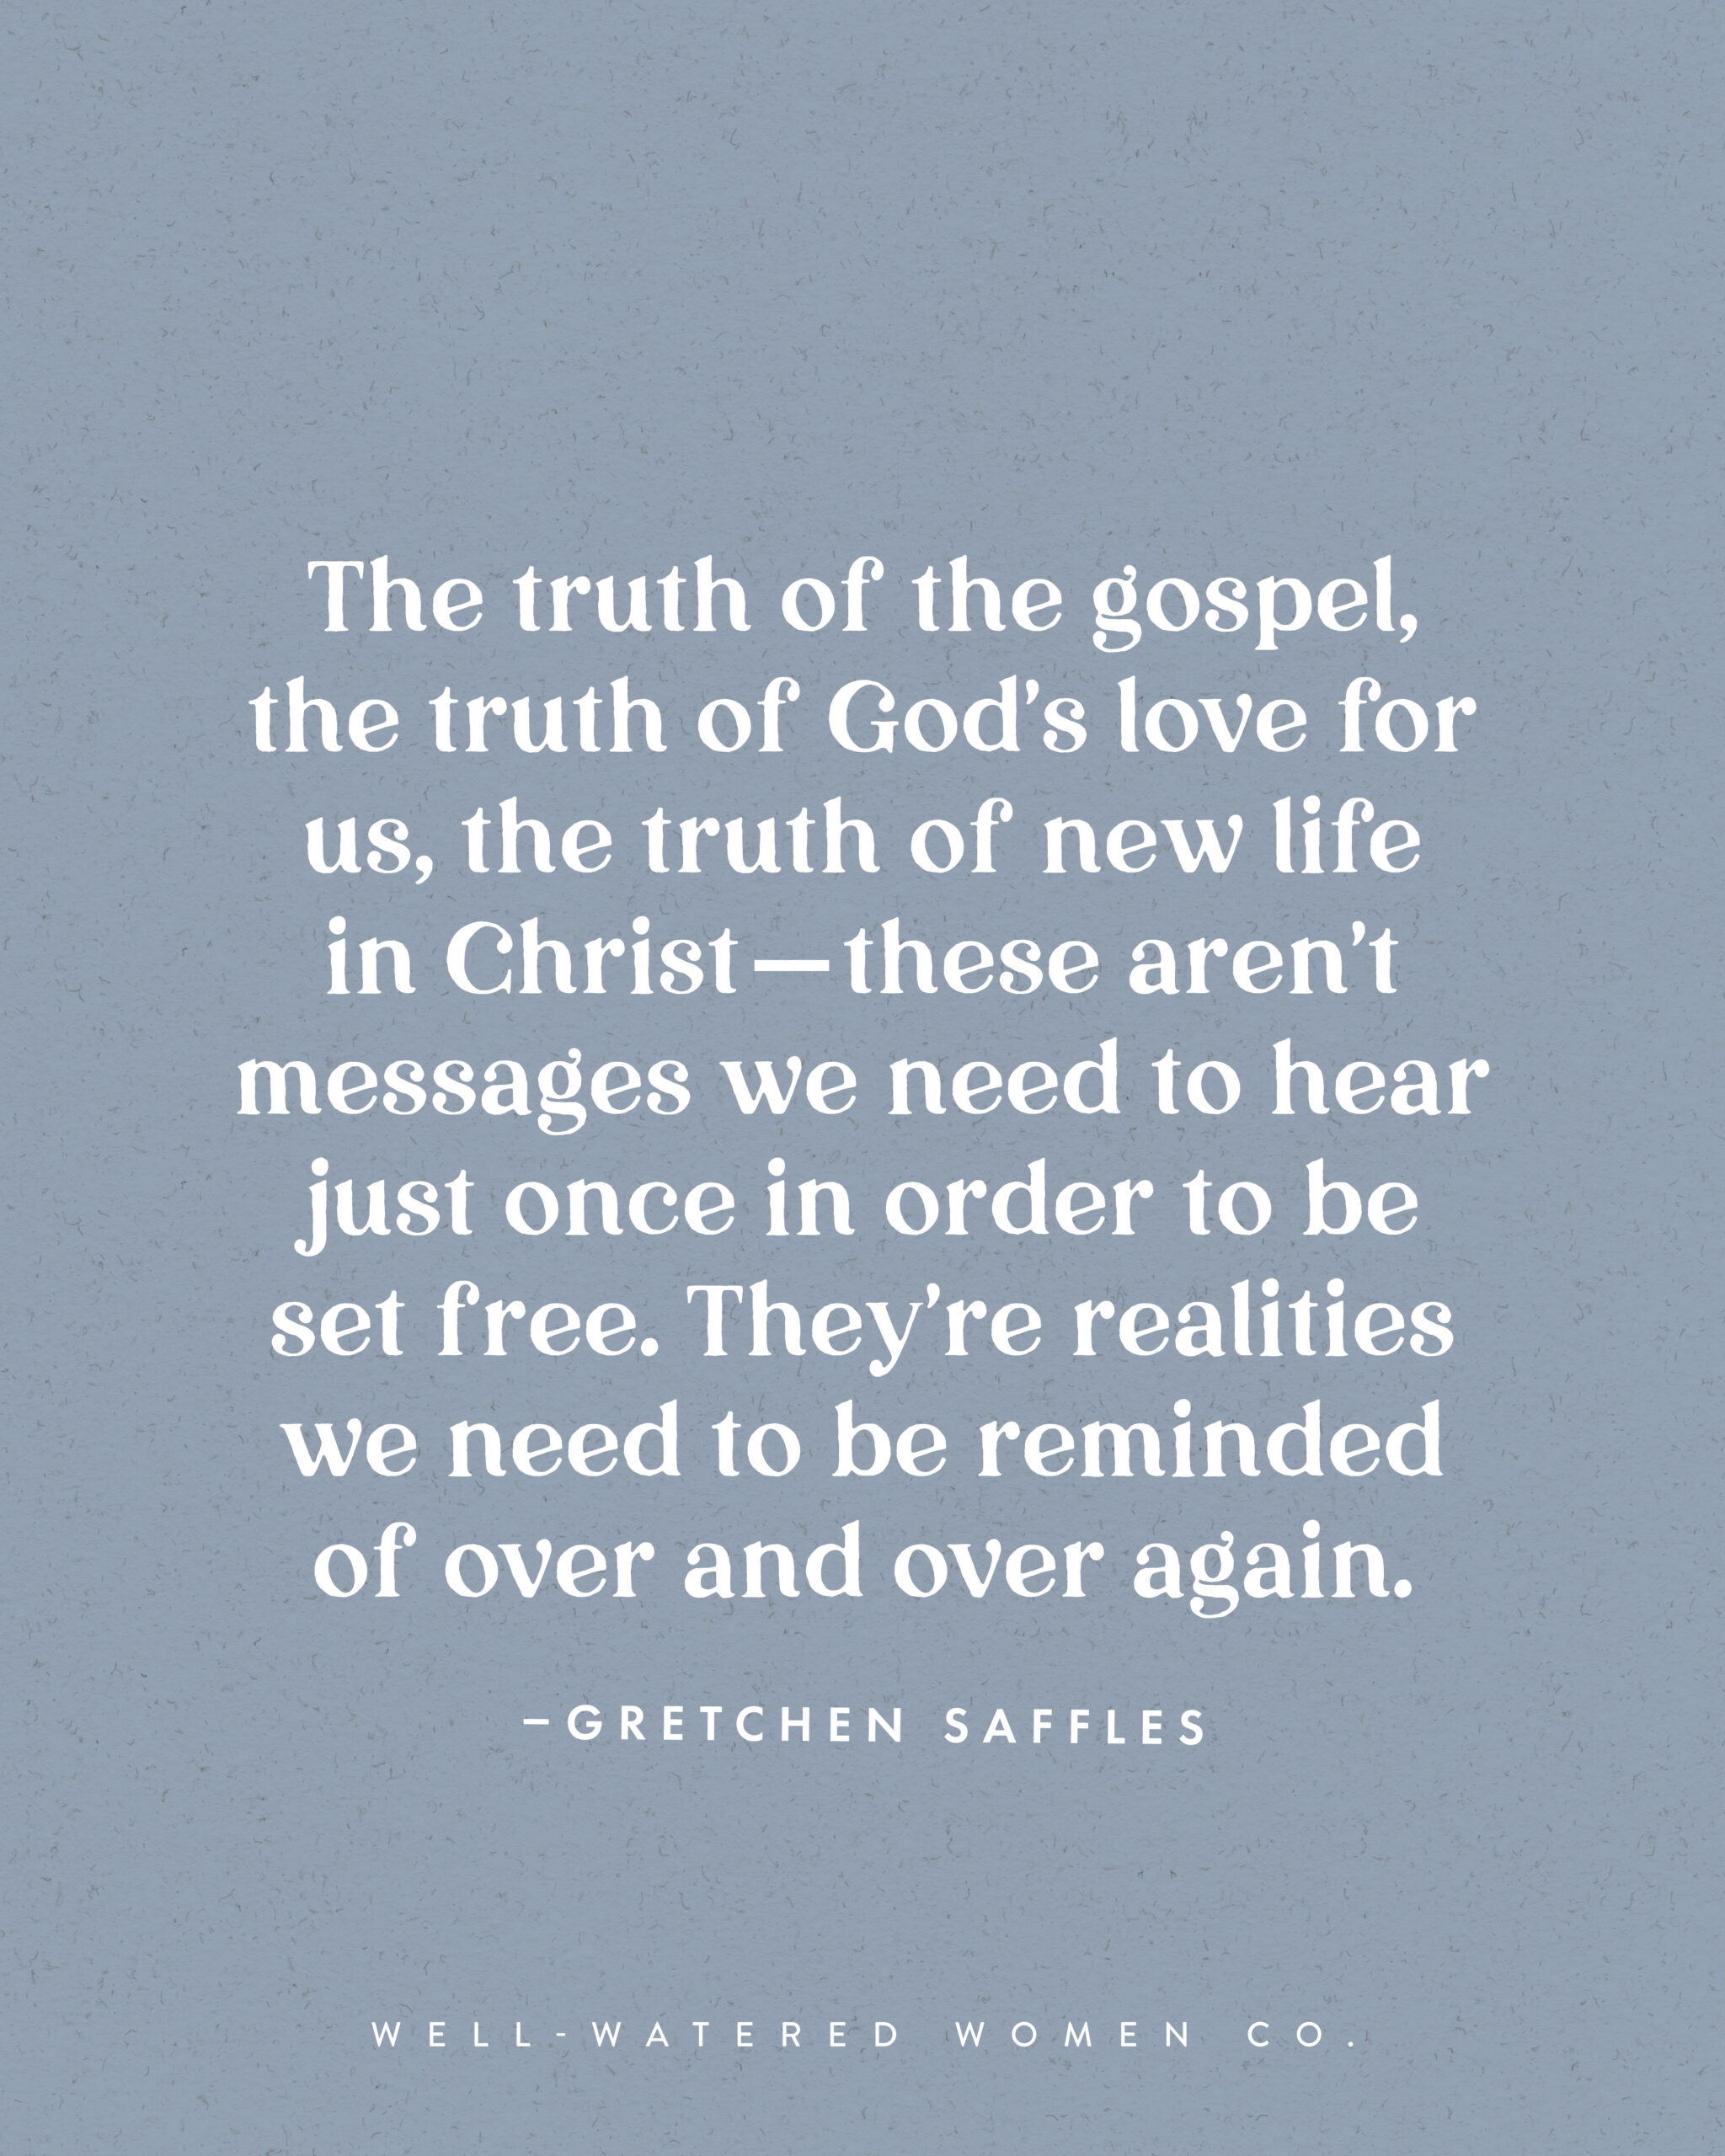 The Battle for Truth - an article from Well-Watered Women - quote